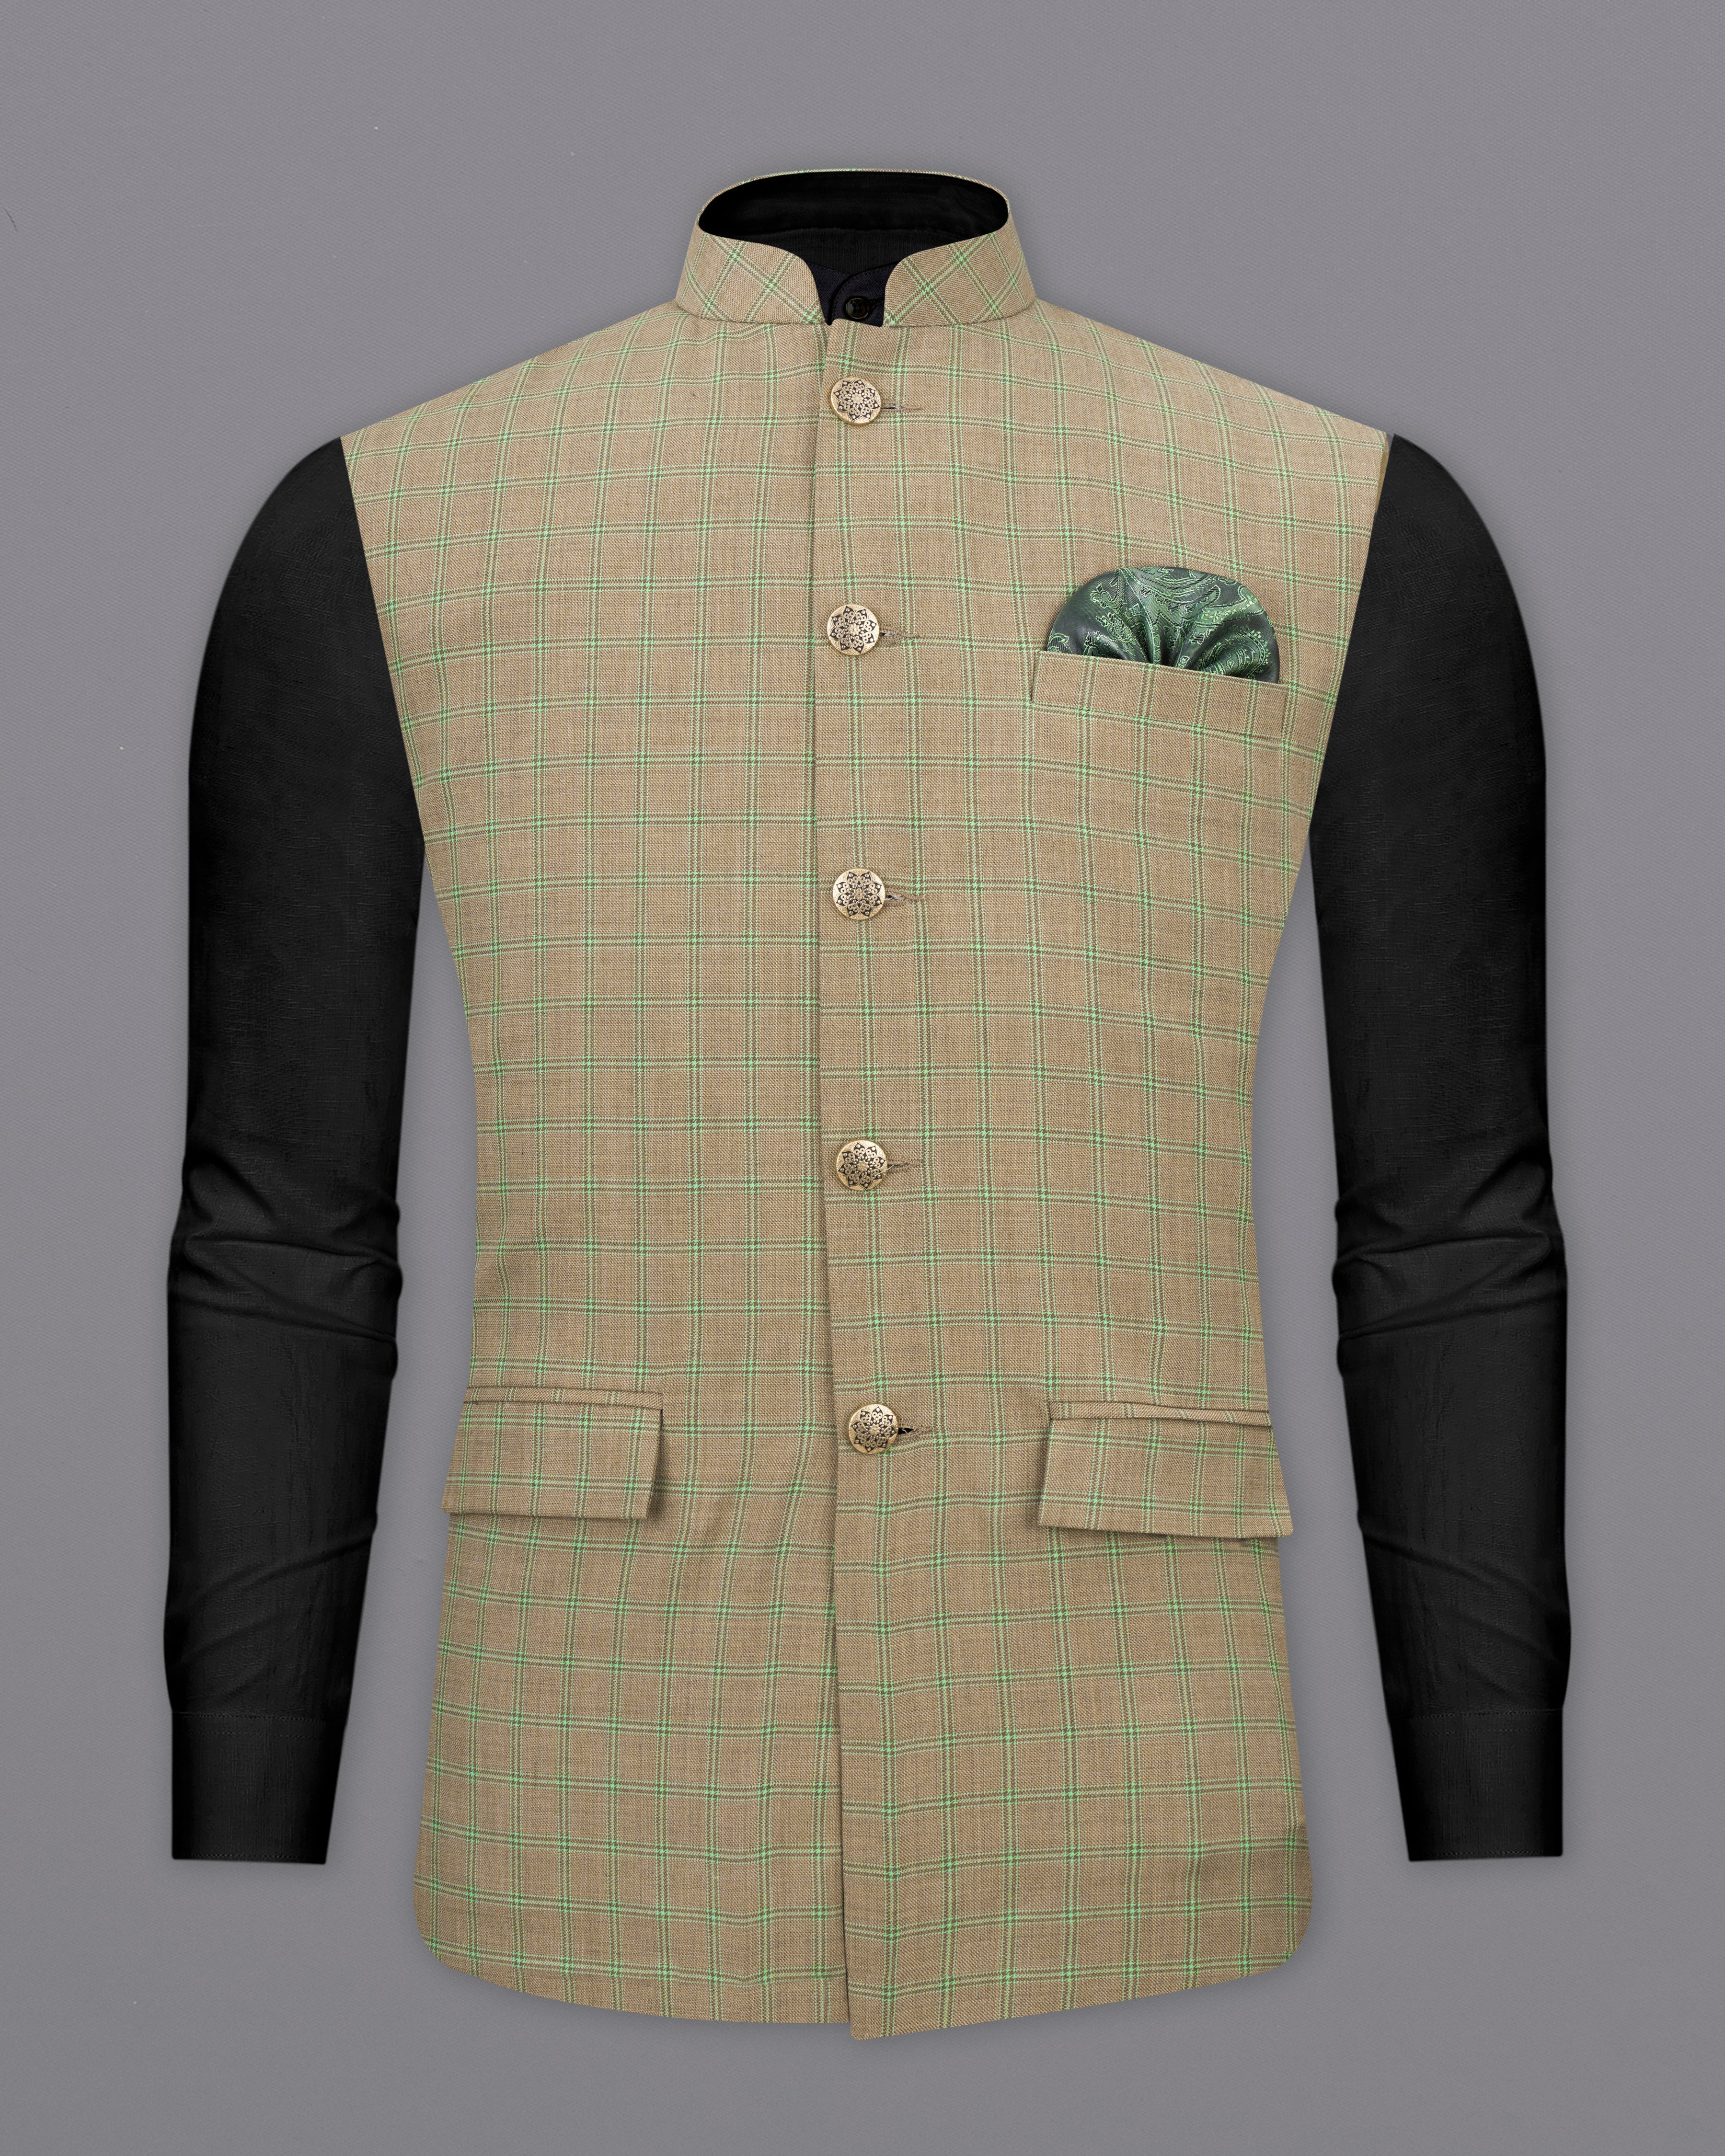 Sandrift Brown with Sprout Green Plaid Nehru Jacket WC2483-38, WC2483-39, WC2483-40, WC2483-42, WC2483-44, WC2483-46, WC2483-48, WC2483-50, WC2483-52